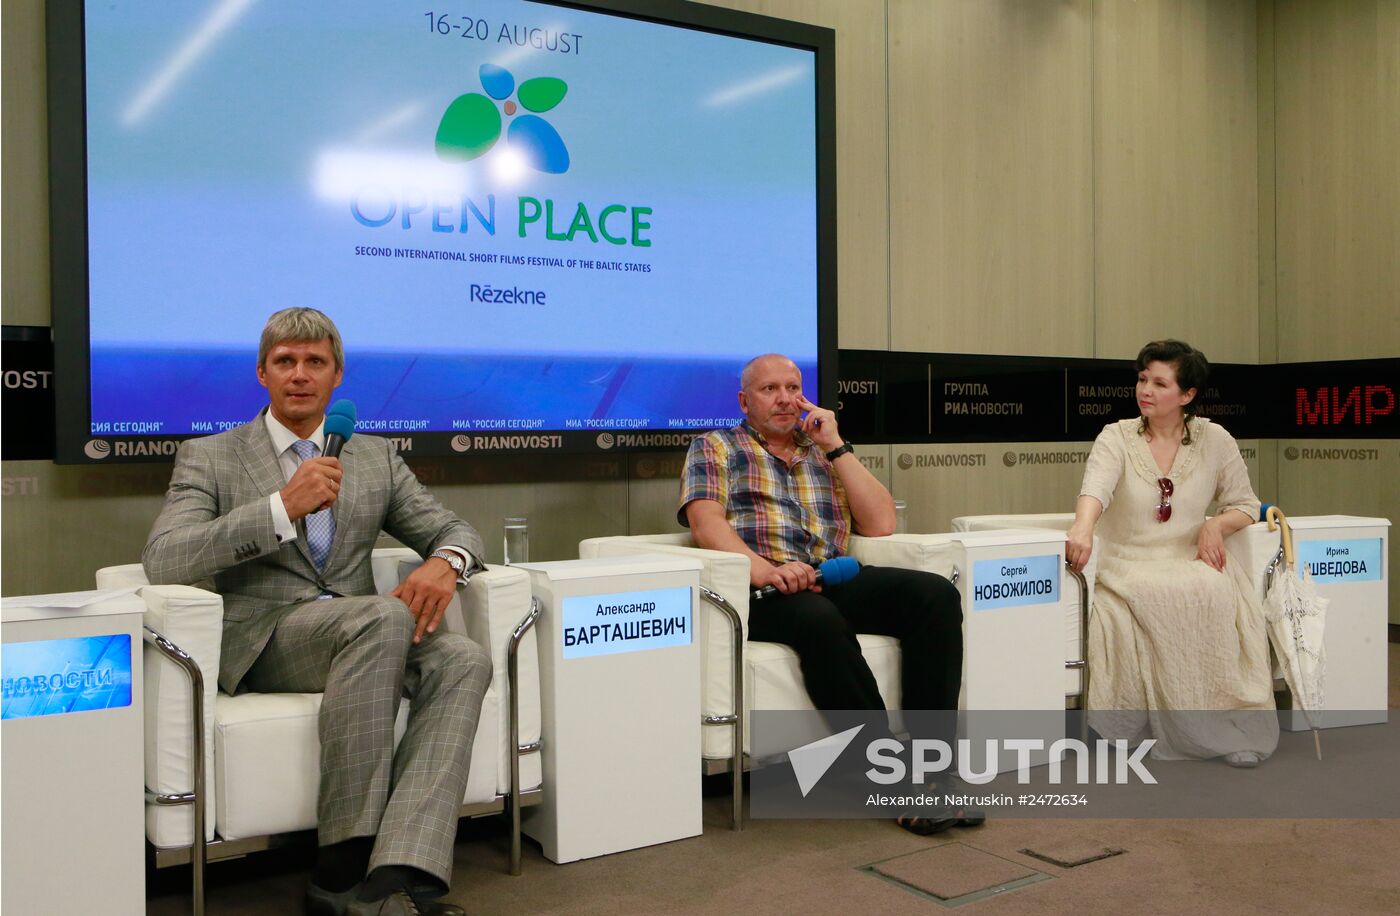 News conference by organizers of the Second Open Place International Festival of Short Films from Baltic Countries